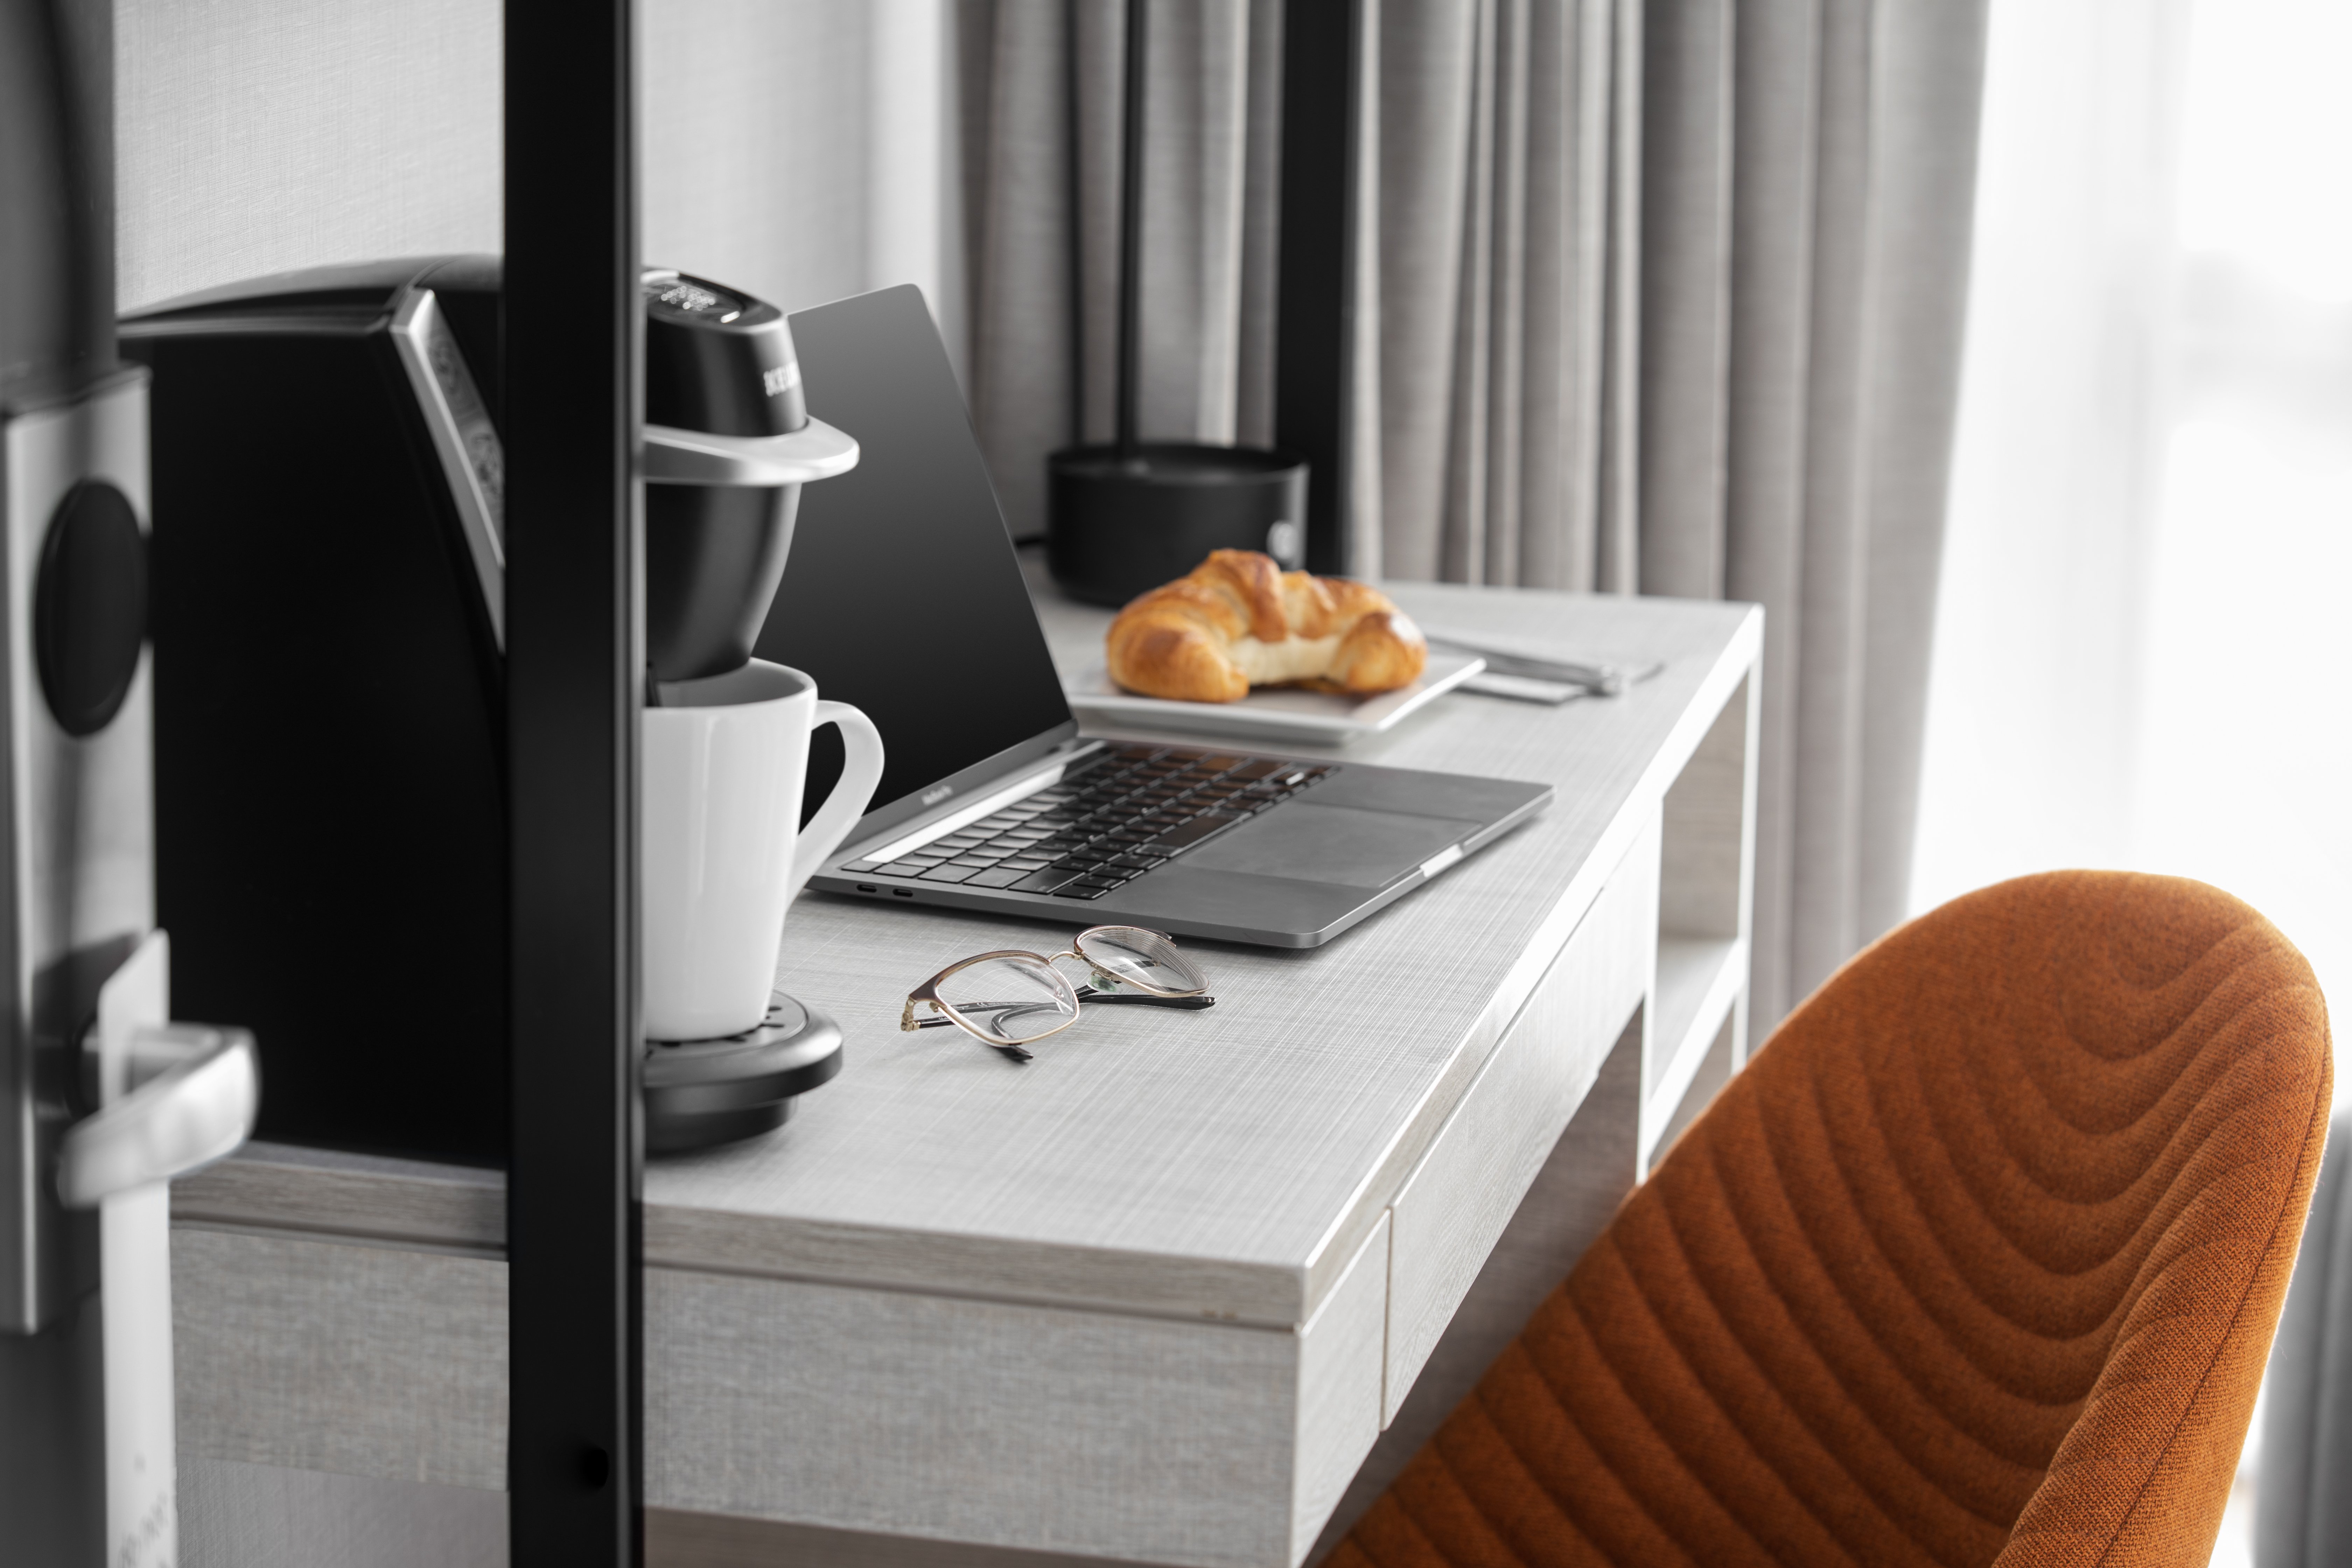 All guest rooms feature Keurig coffeemaker and separate workspace.